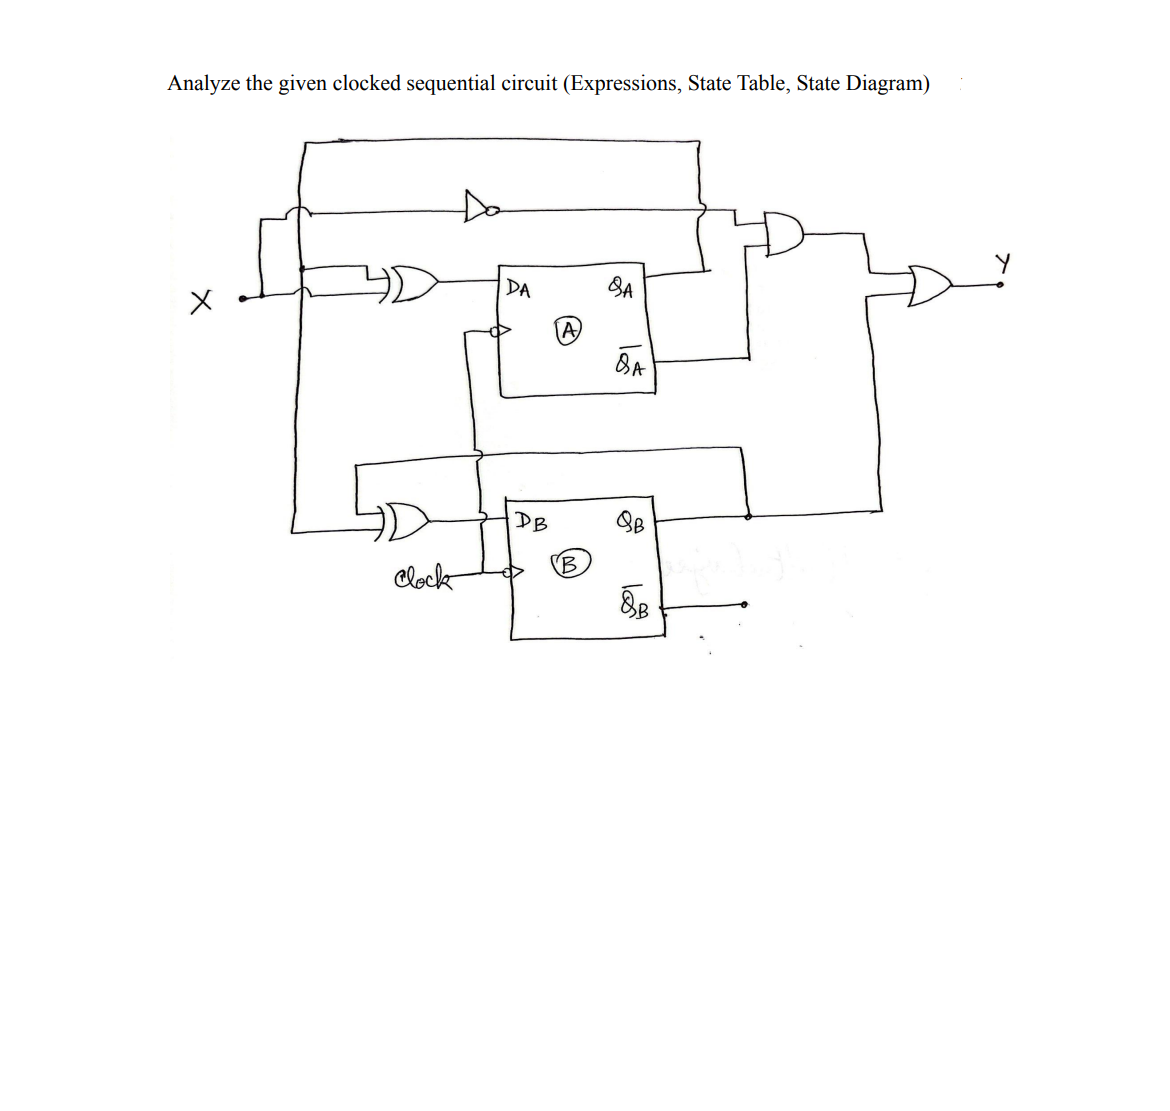 Analyze the given clocked sequential circuit (Expressions, State Table, State Diagram)
Do
DA
BA
BA
DB
(B
Clock
